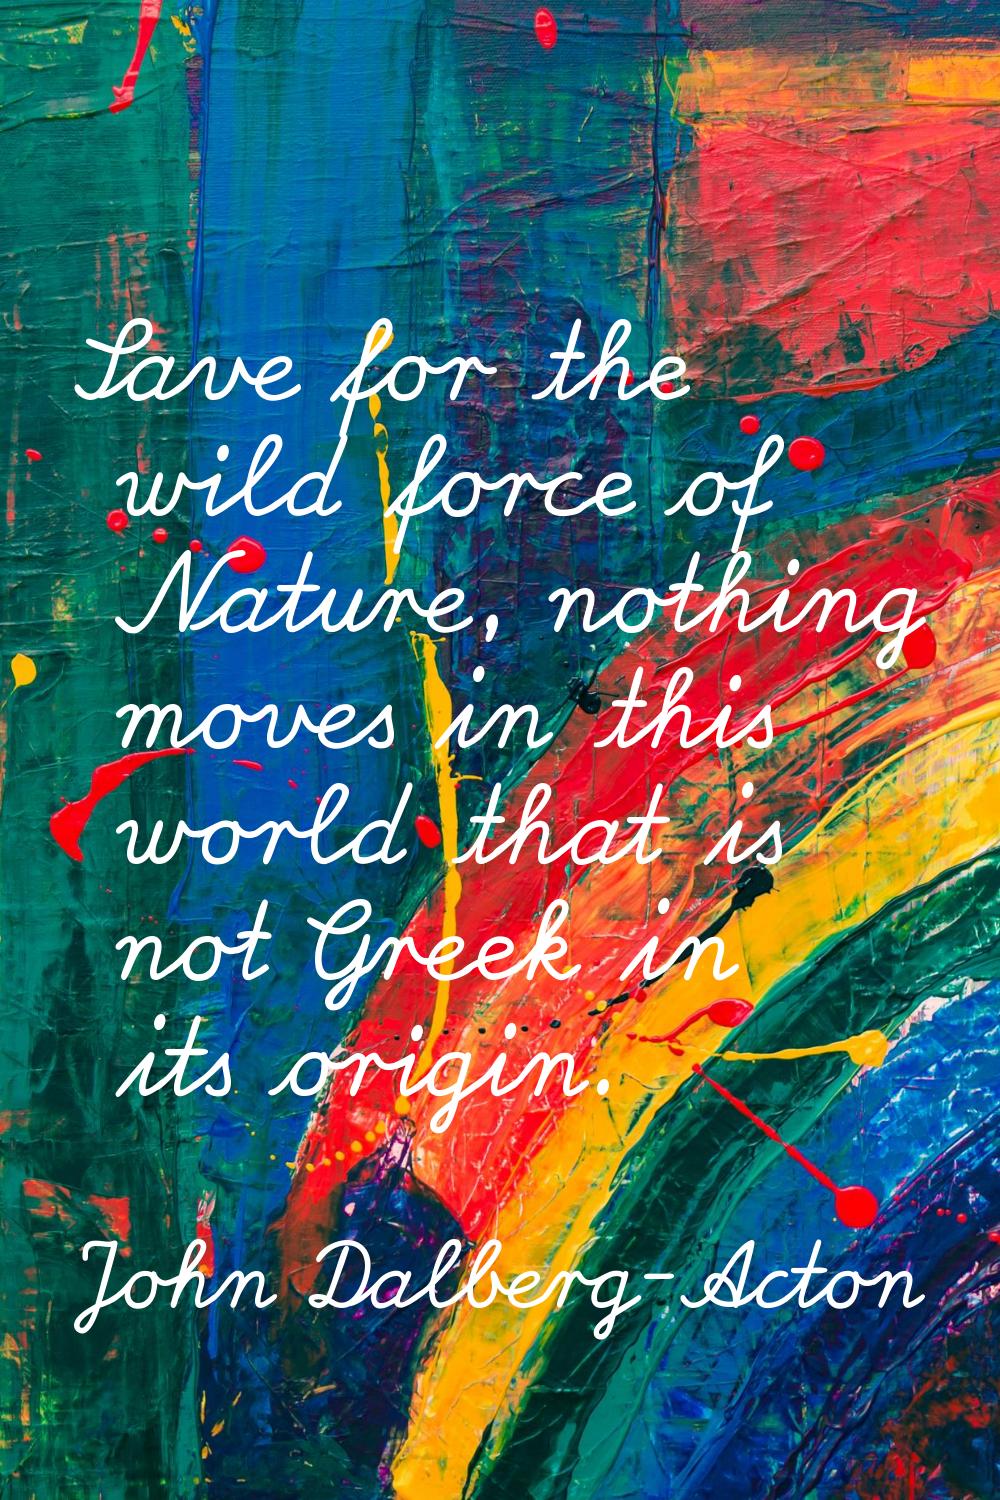 Save for the wild force of Nature, nothing moves in this world that is not Greek in its origin.